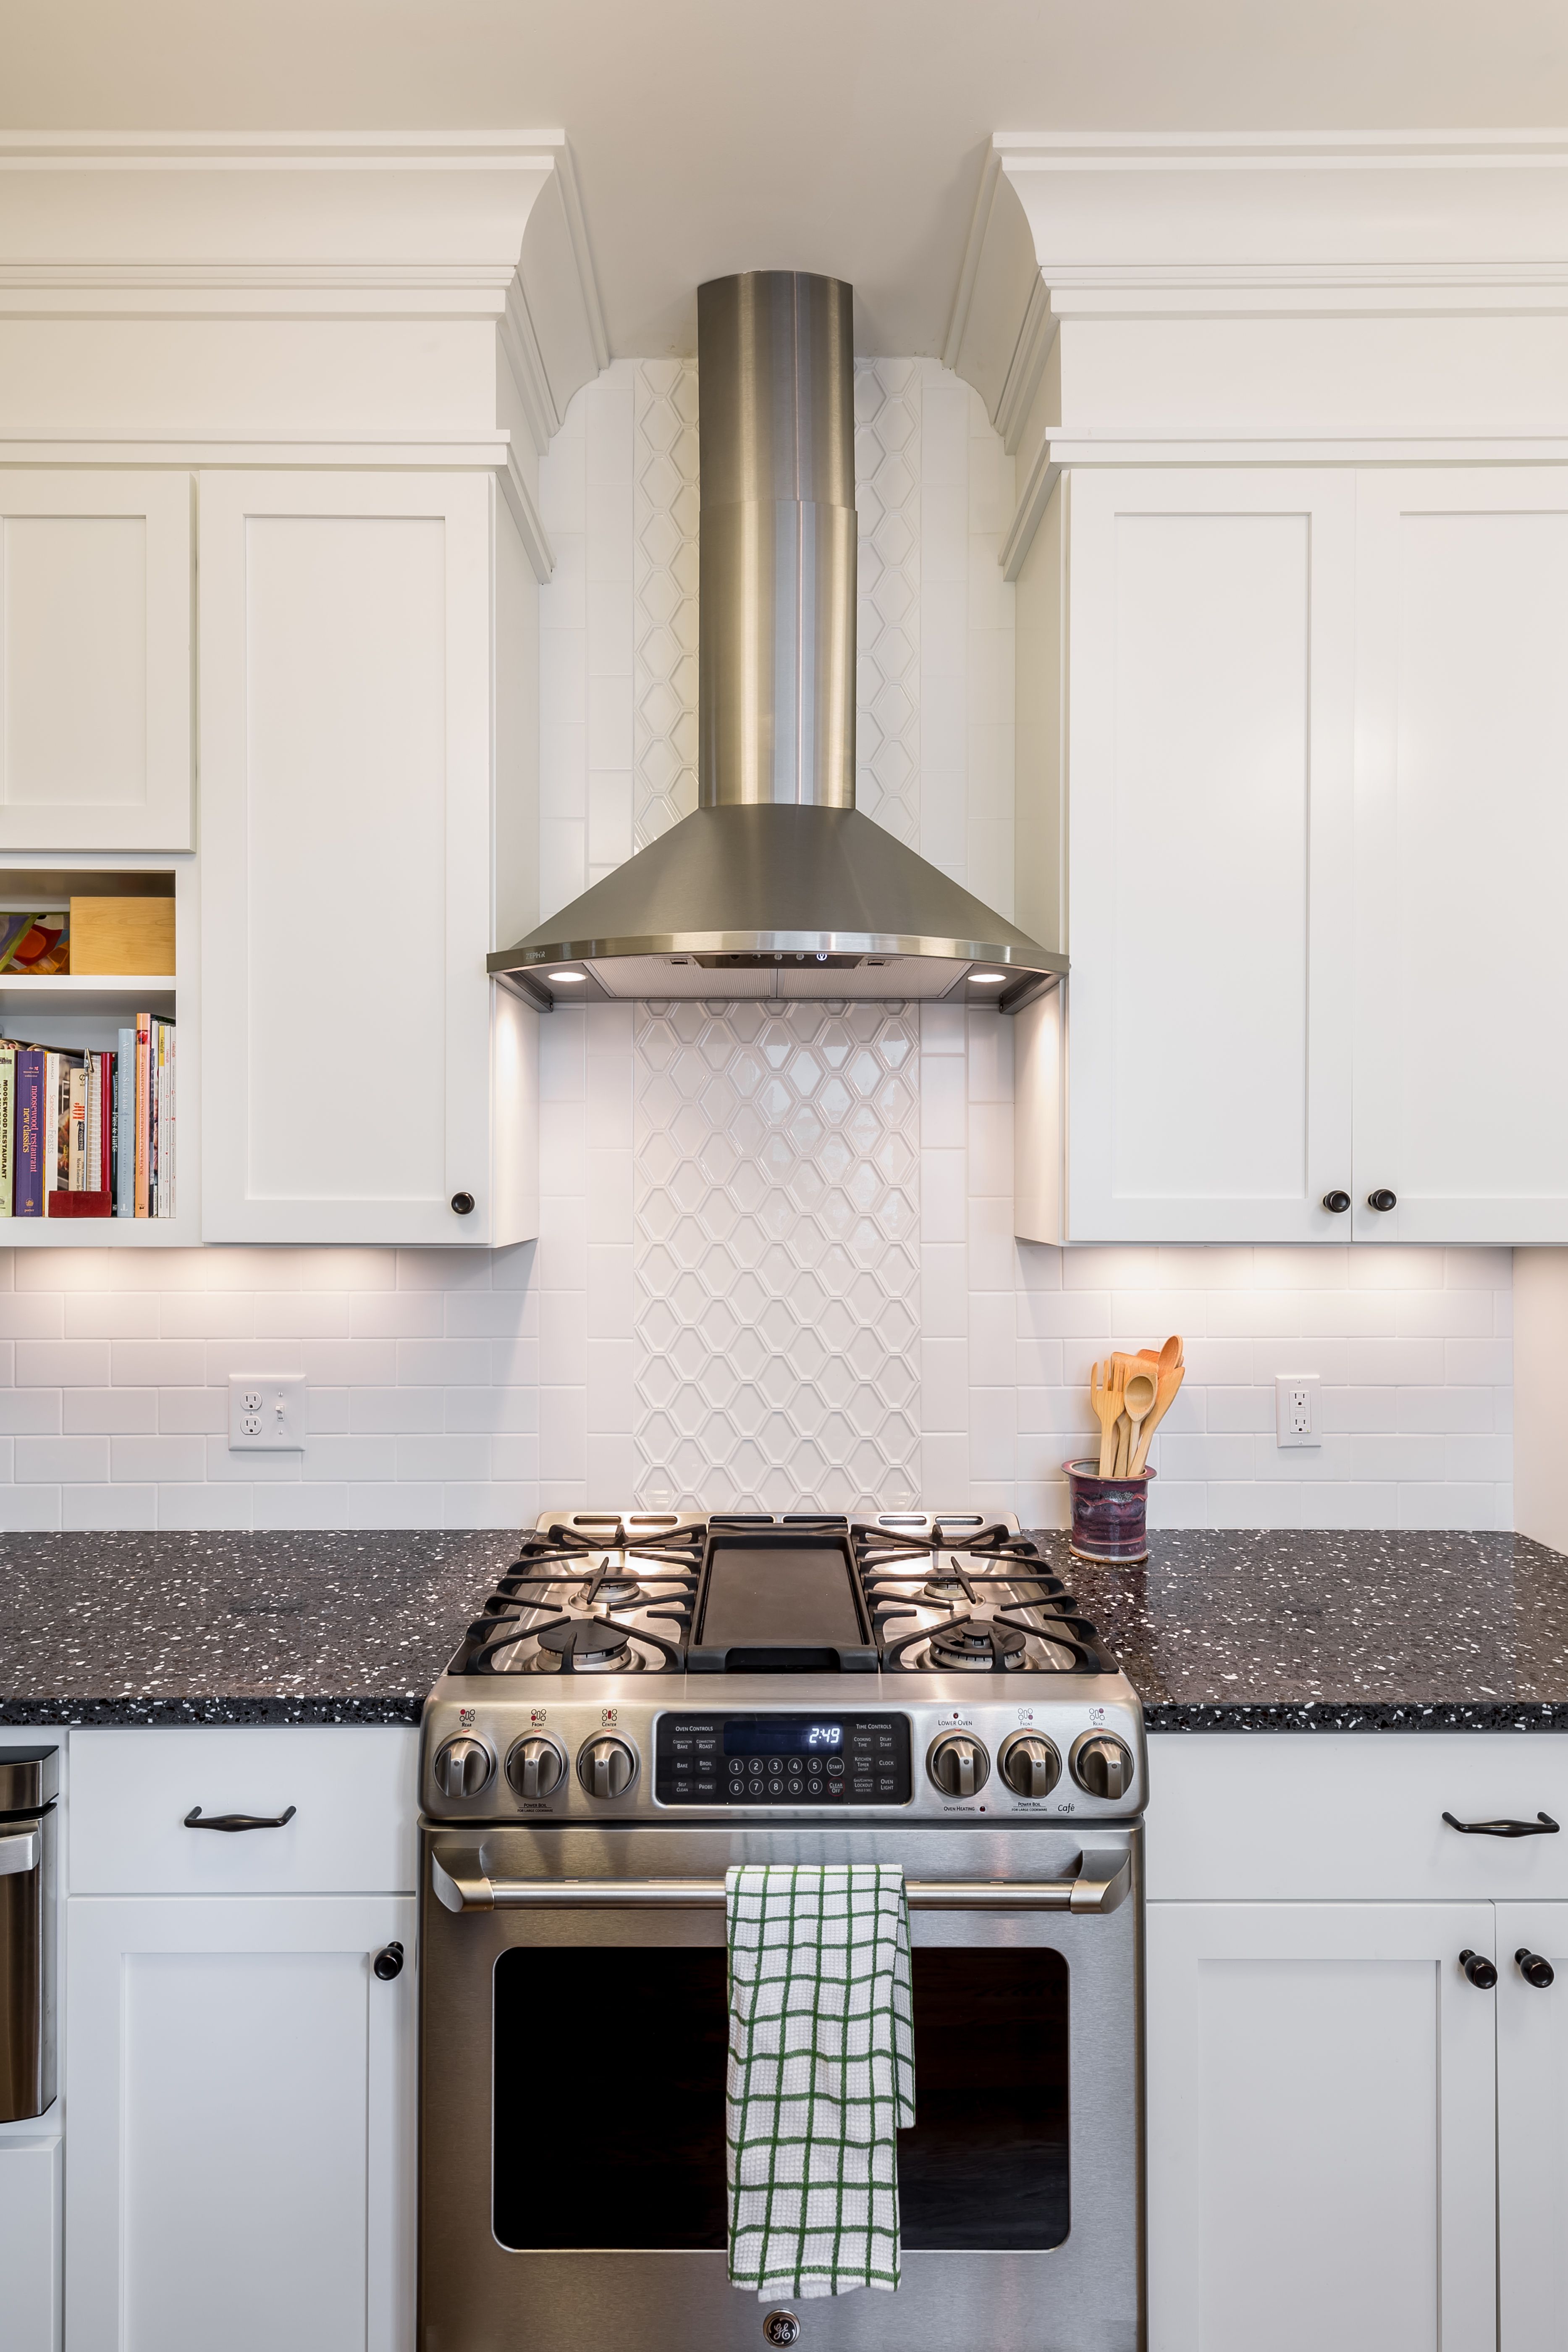 White backsplash that goes up to the ceiling!